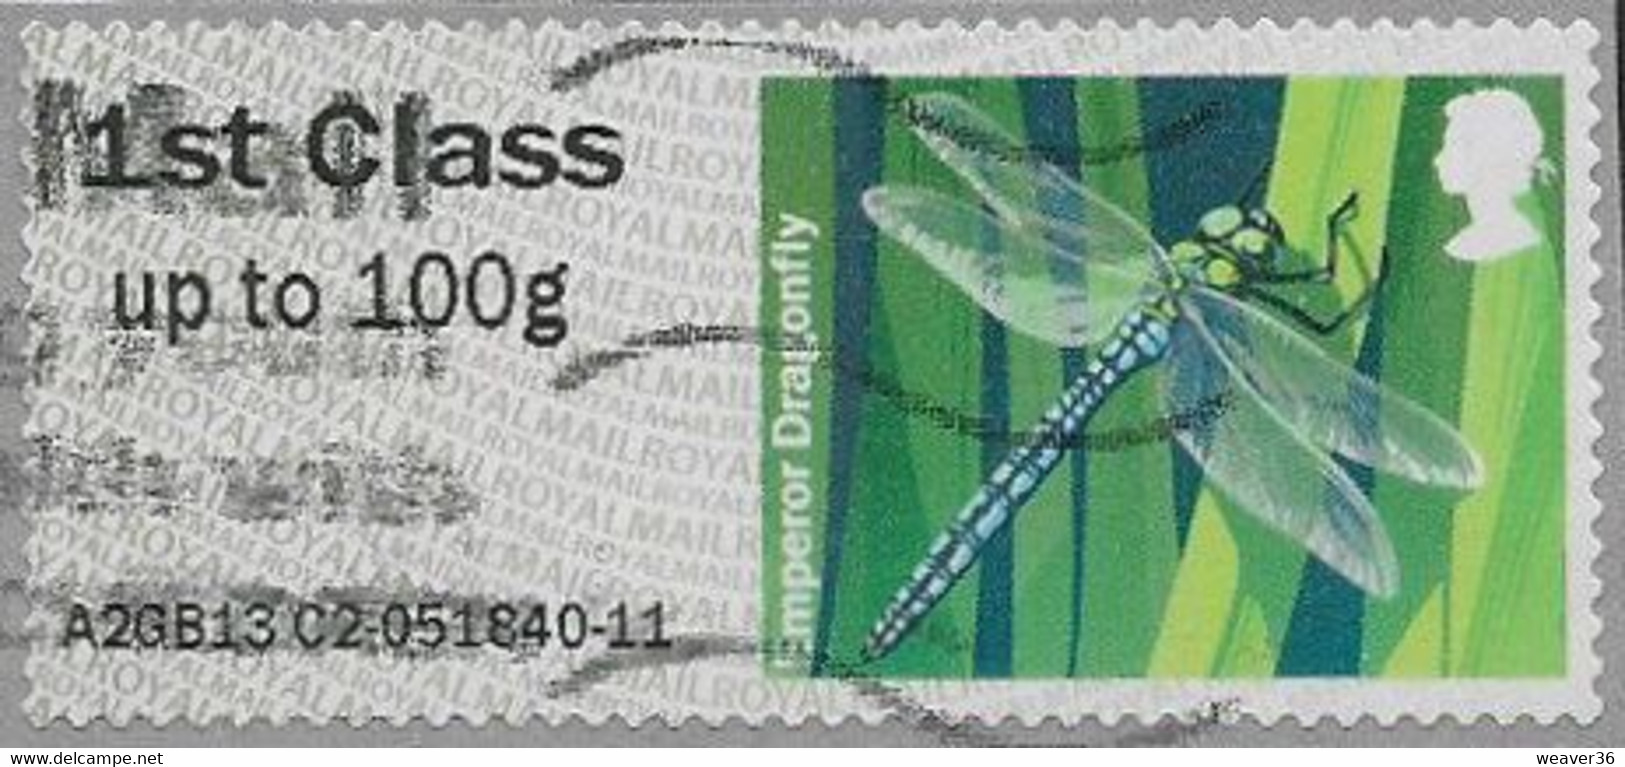 GB 2013 Freshwater Life (1st Series) 1st Type 5 Issuing Office A2GB13 Used [21/25714/ND] - Post & Go (distributeurs)